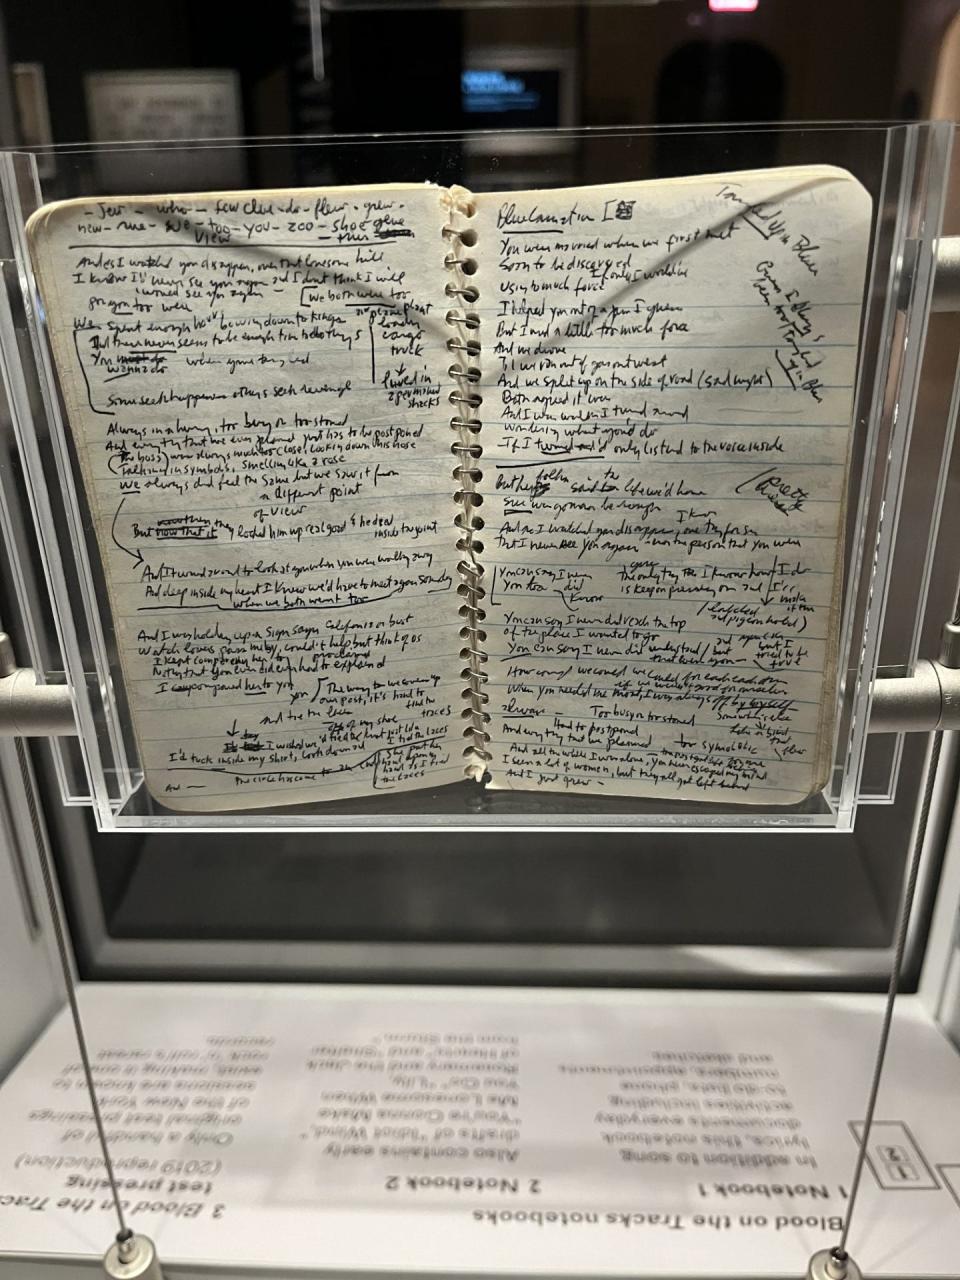 Notebook pages with some of Bob Dylan's handwritten lyrics.